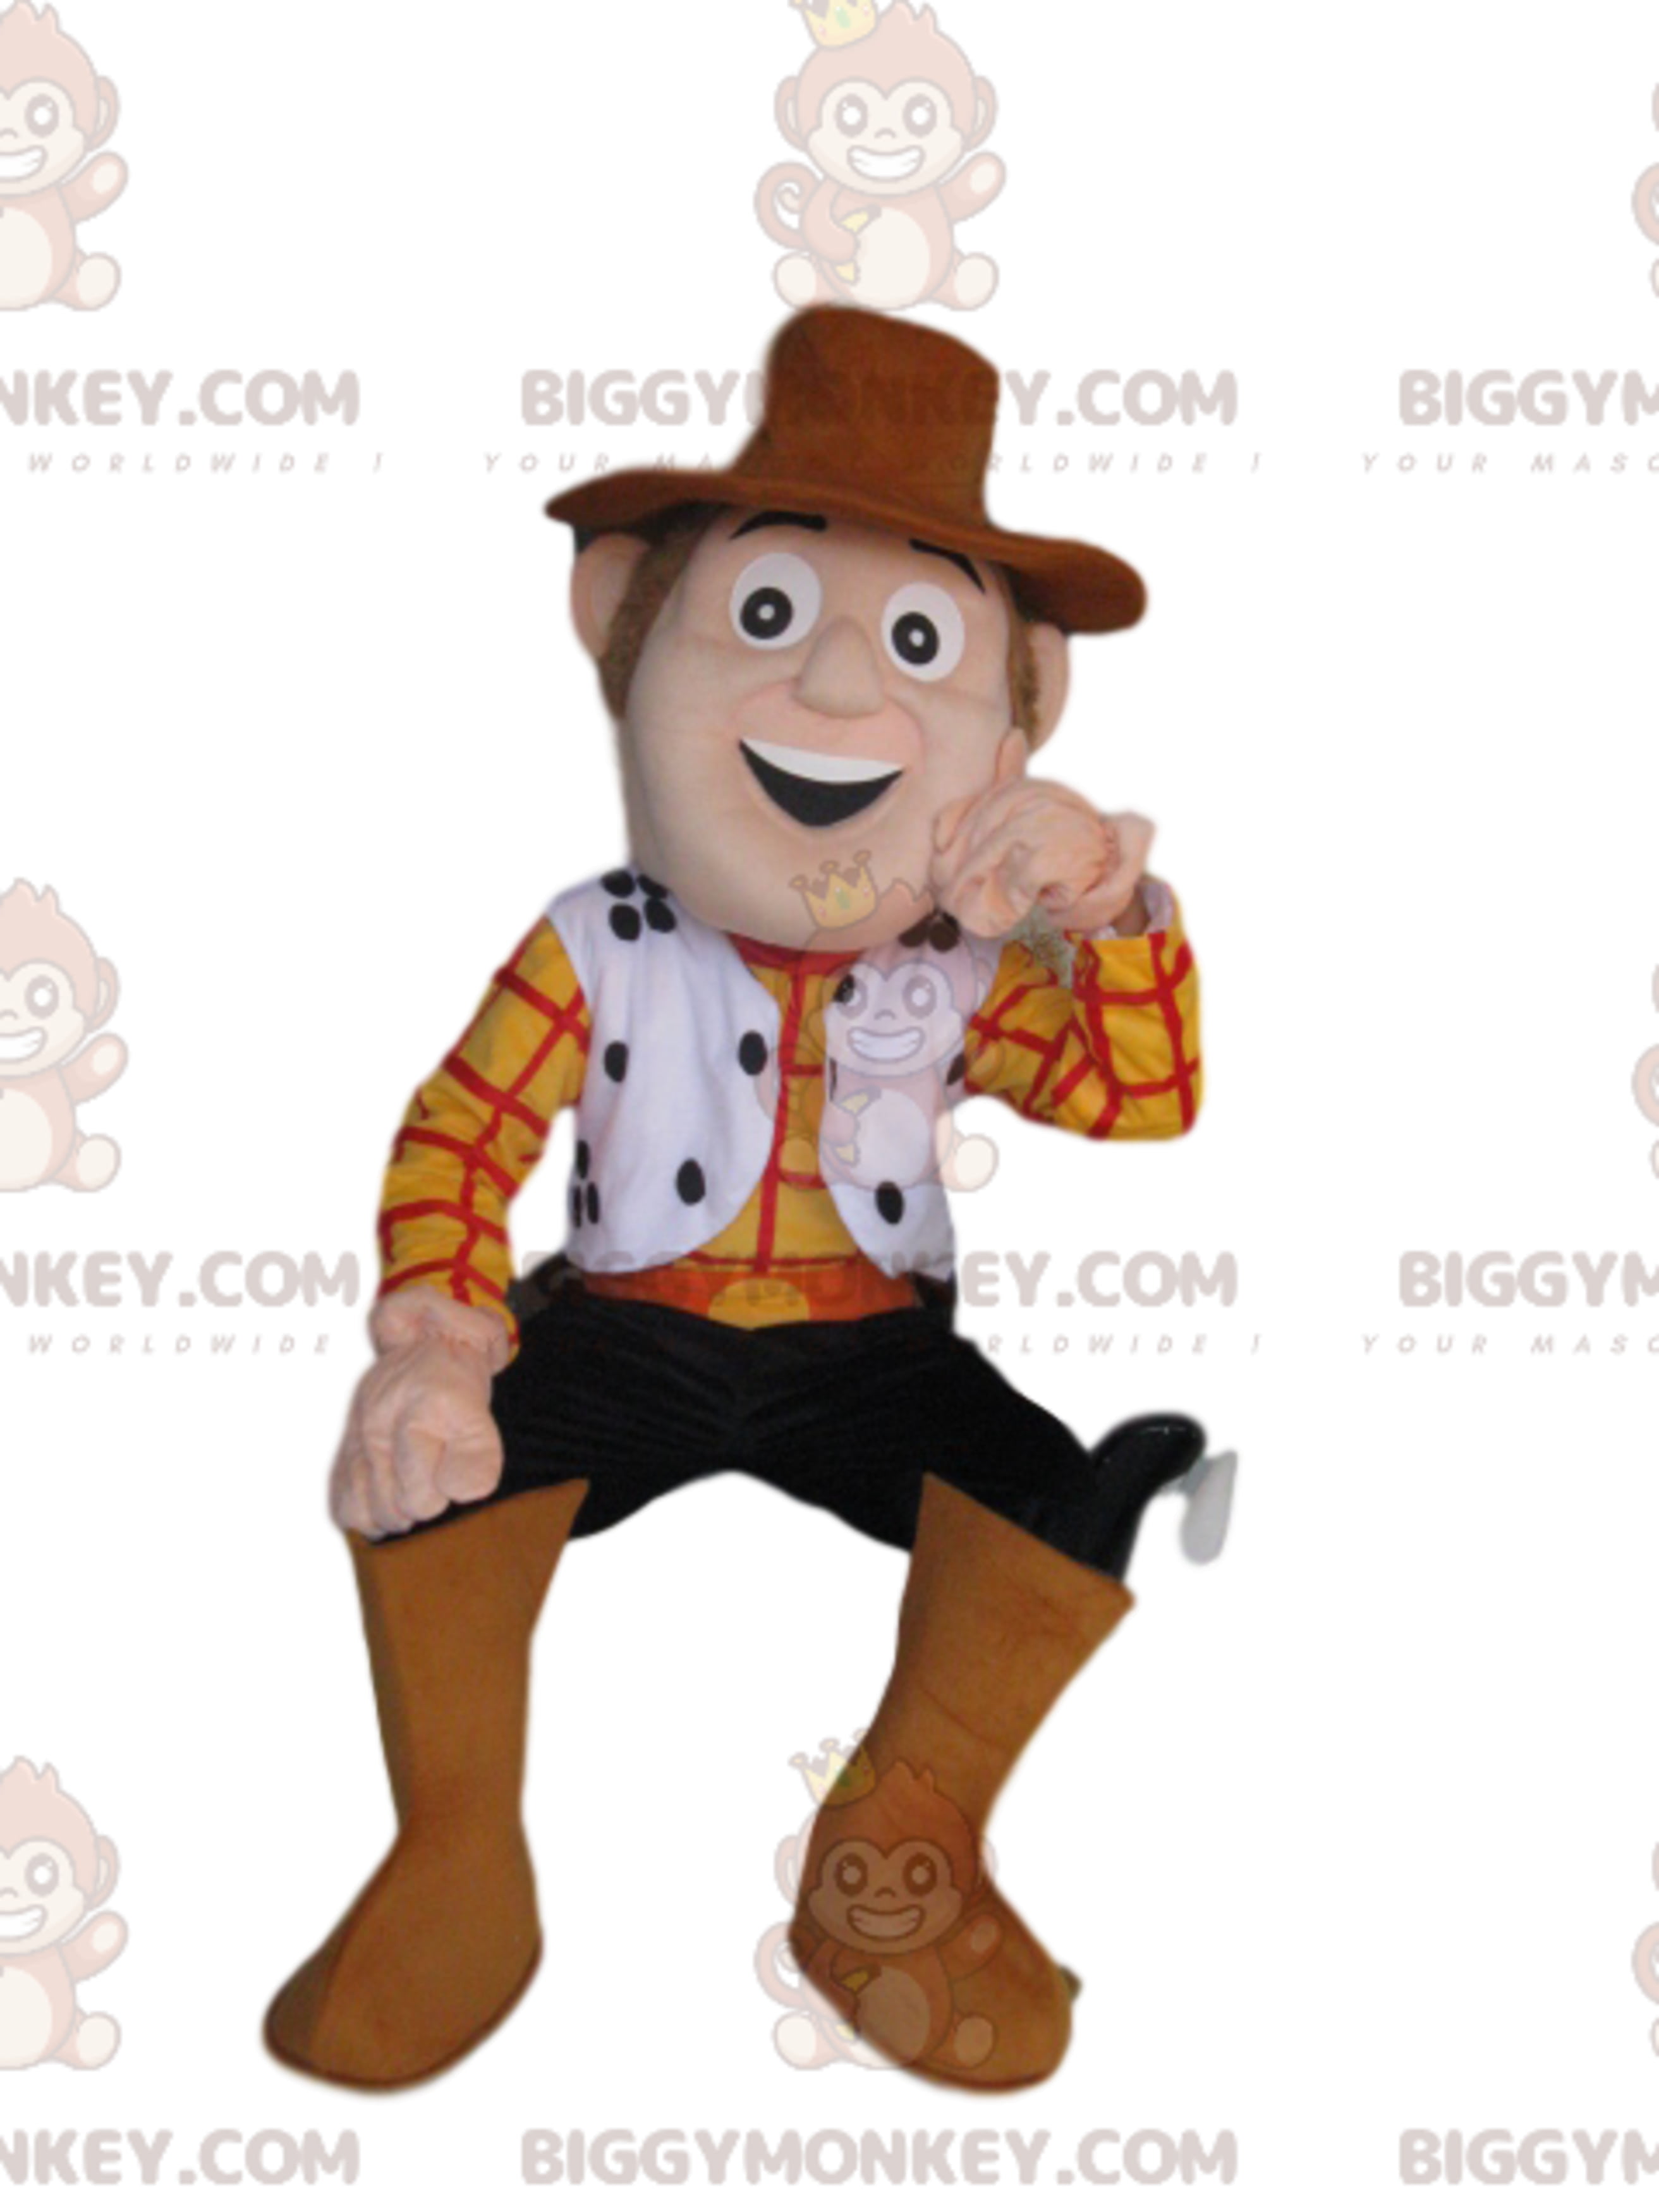 NEW Toy Story Woody Mascot Costume Adult Size Halloween BIRTHDAY Event Boy Party 